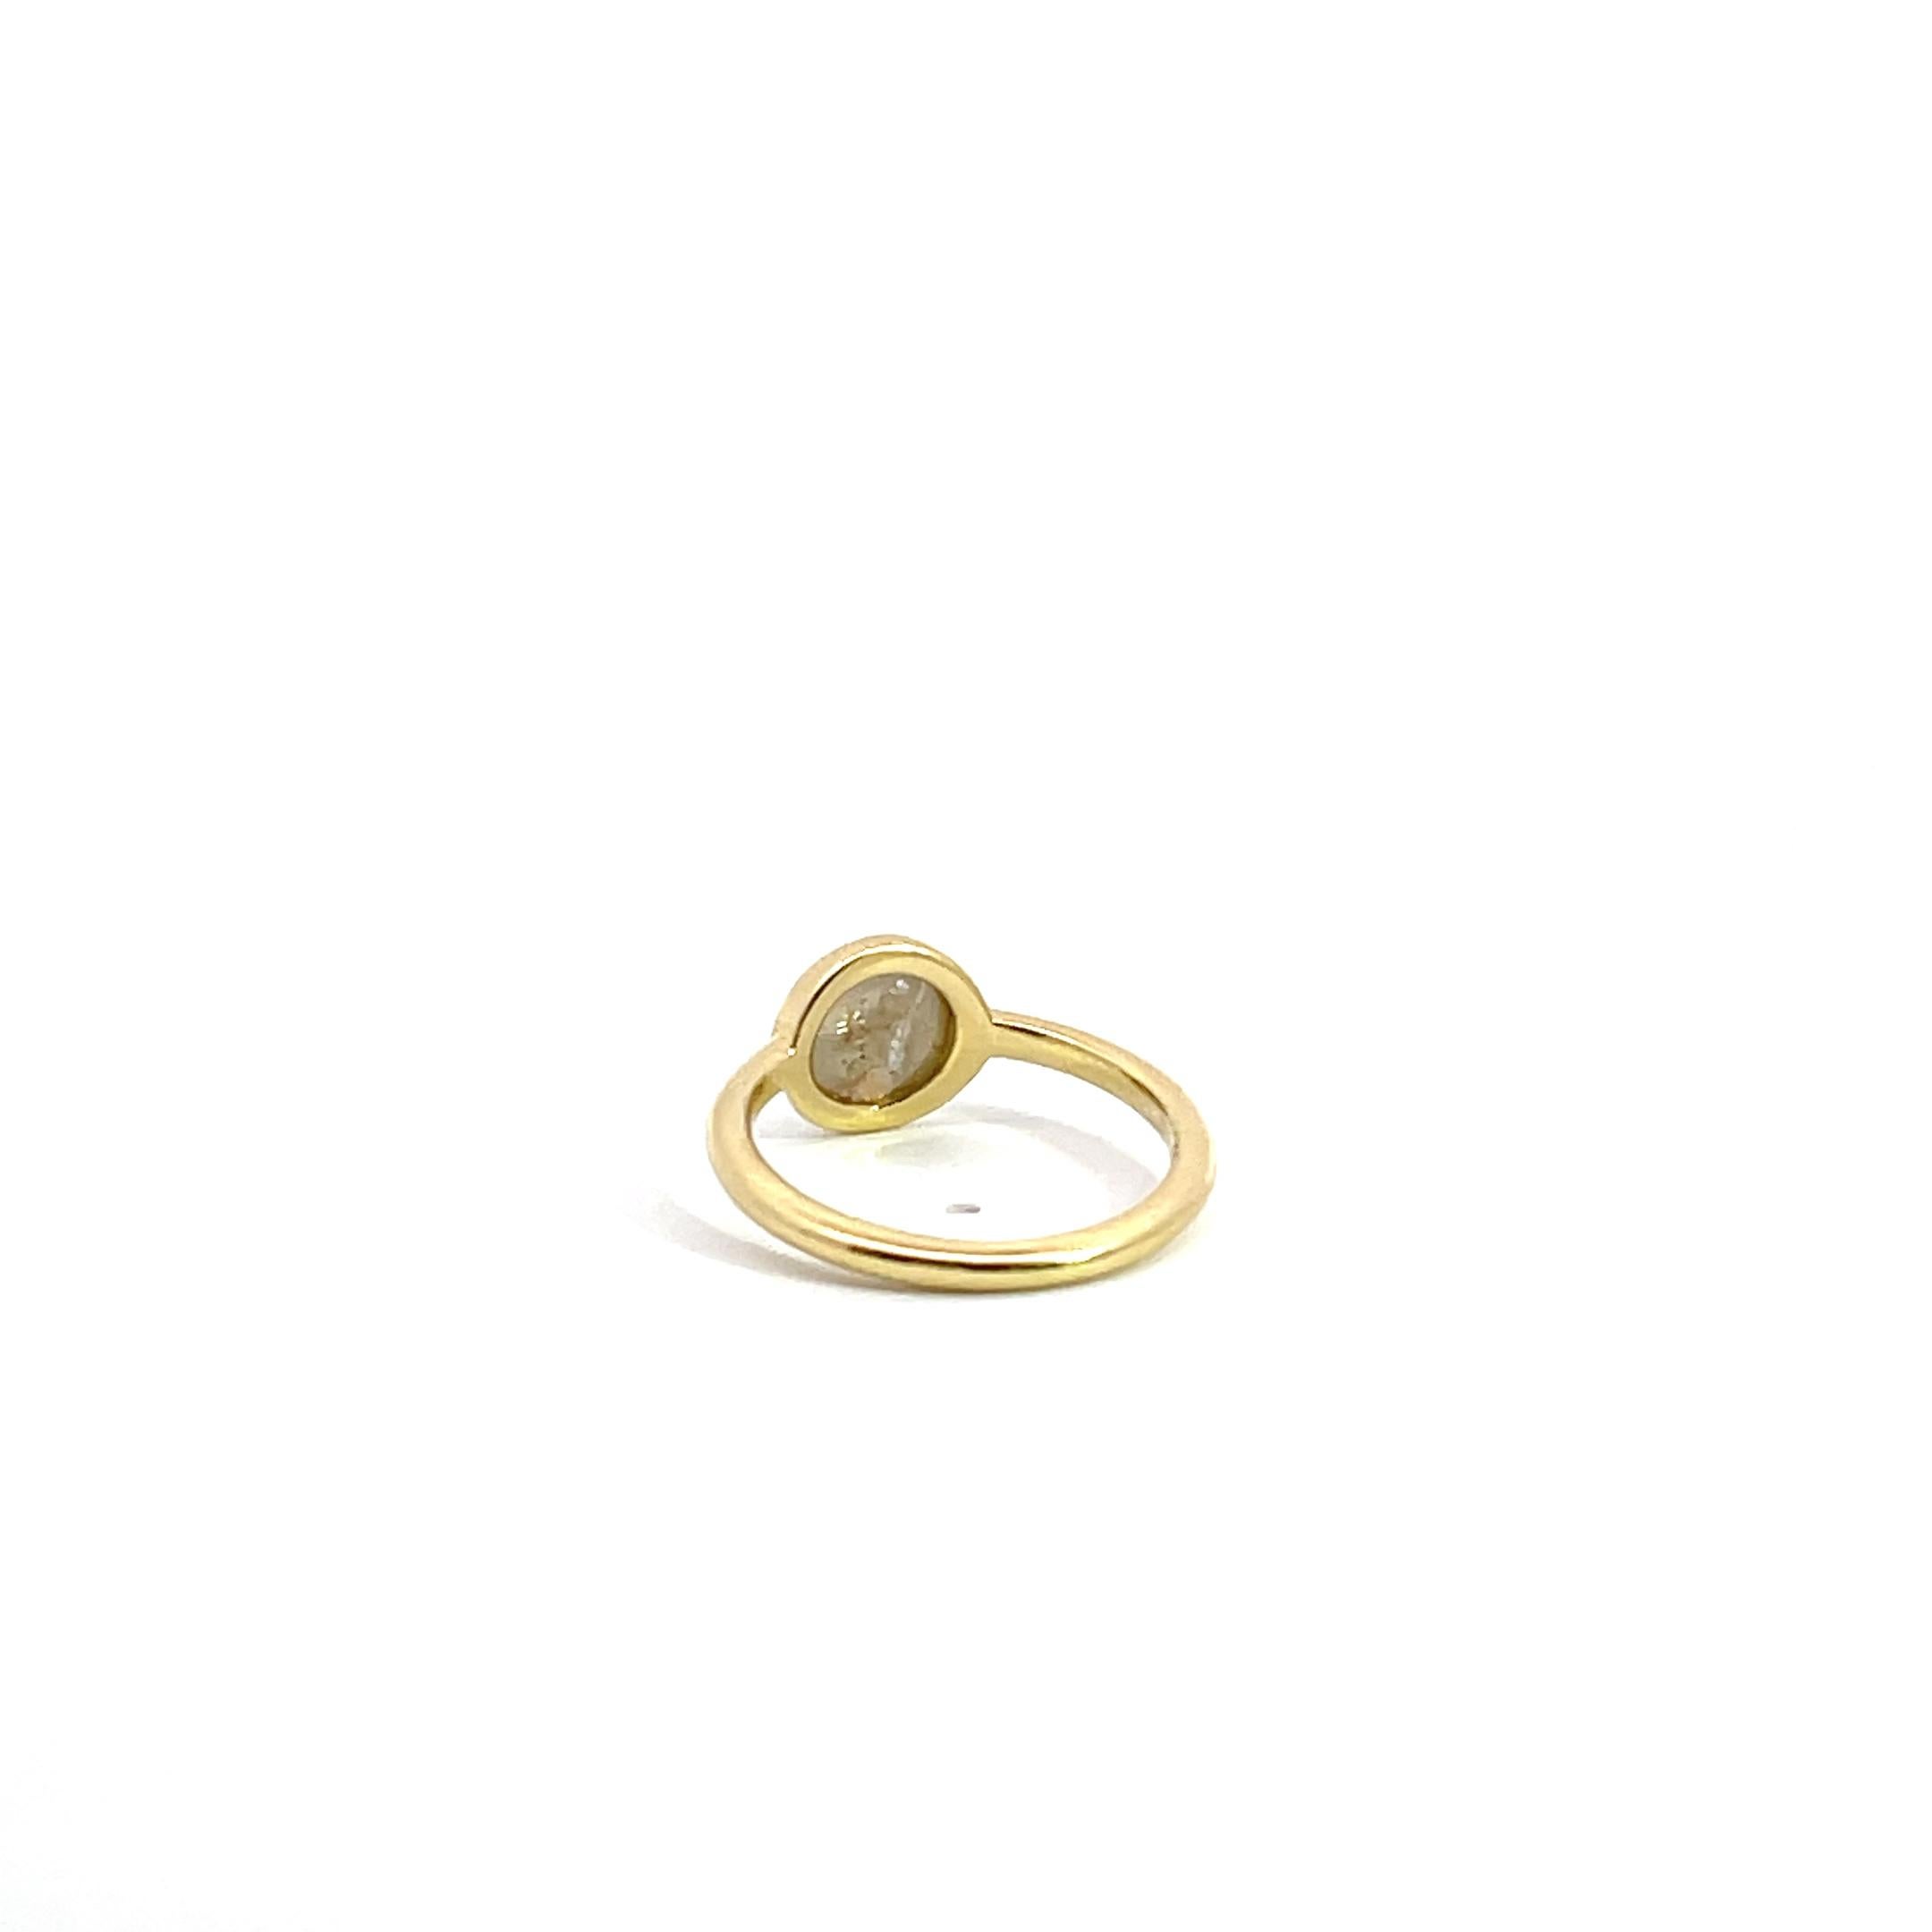 An 18k yellow gold ring with a 1.8 carat rose cut gray diamond. This ring was designed and made by llyn strong. 